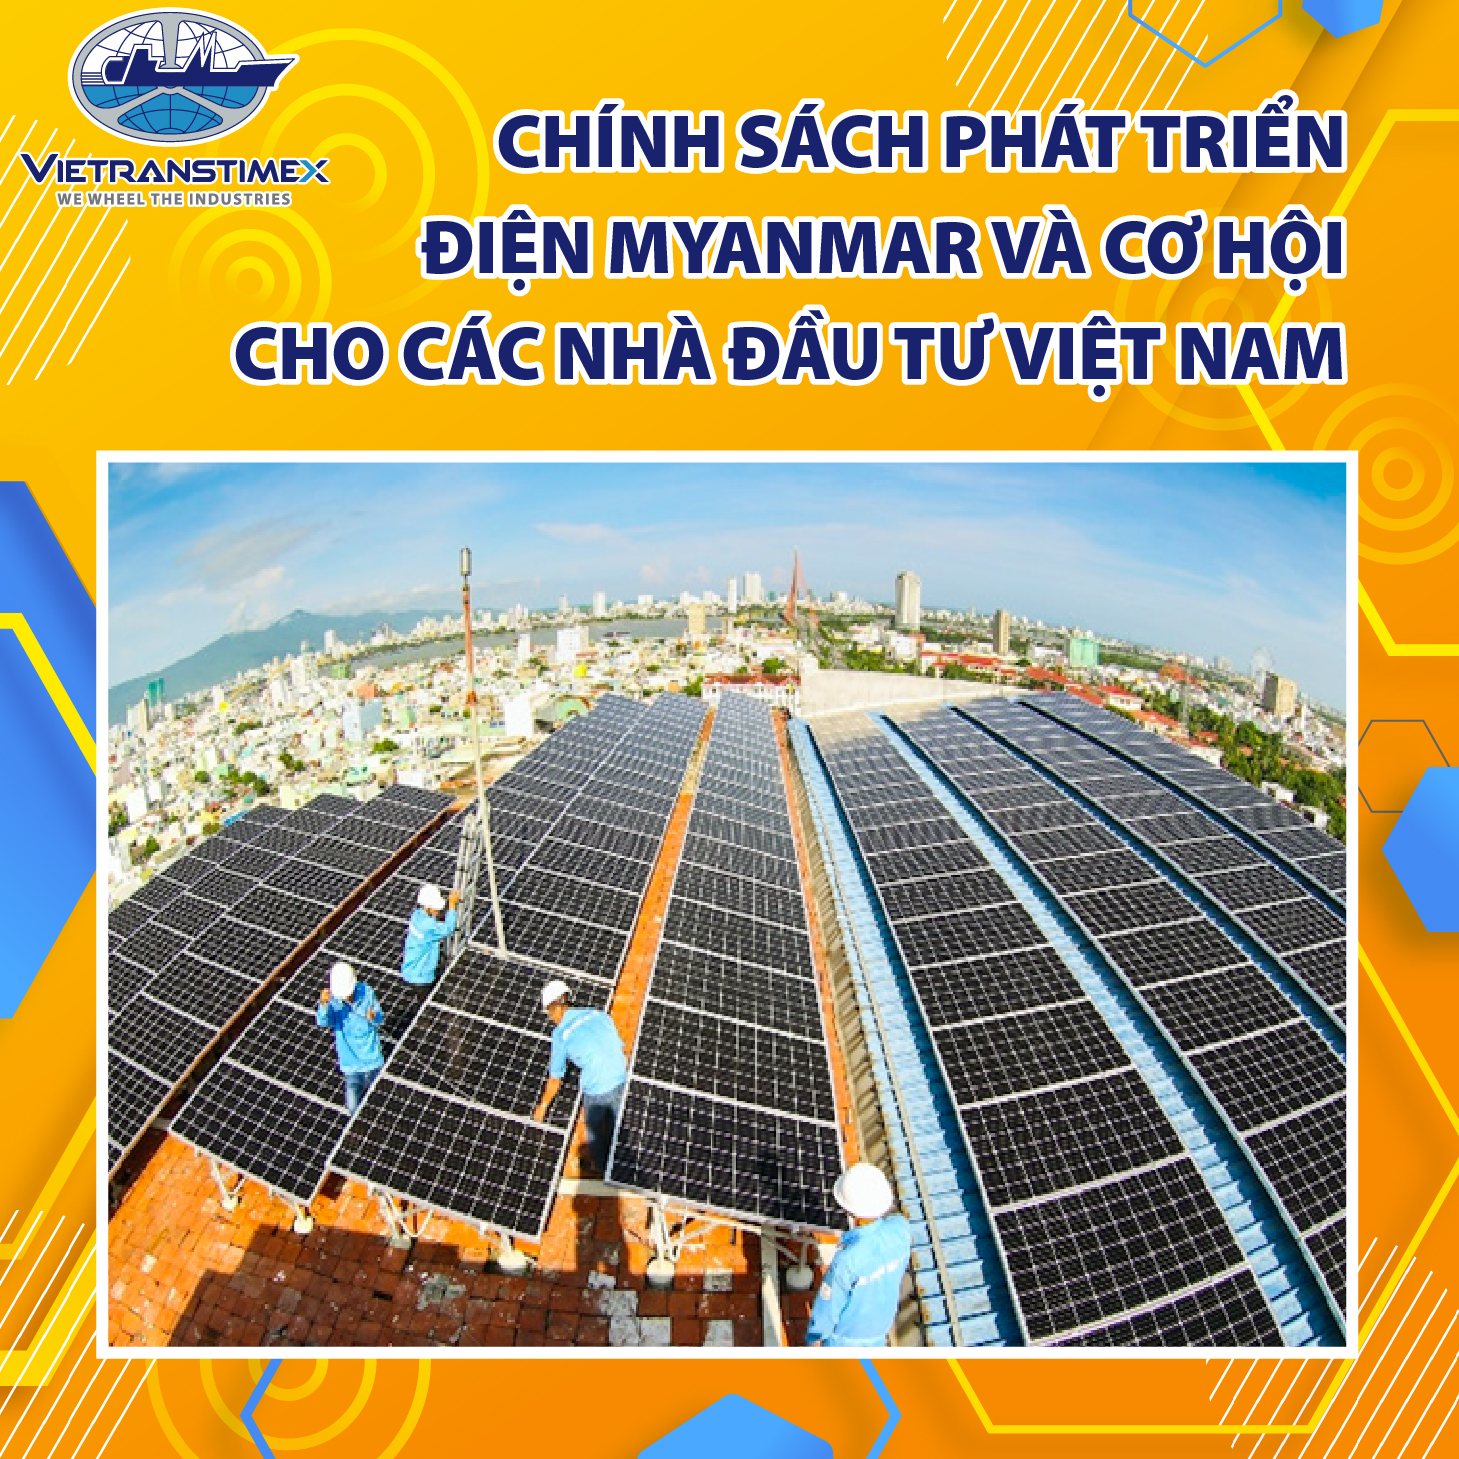 Policy For Electricity Development In Myanmar And Chances For Vietnamese Investors